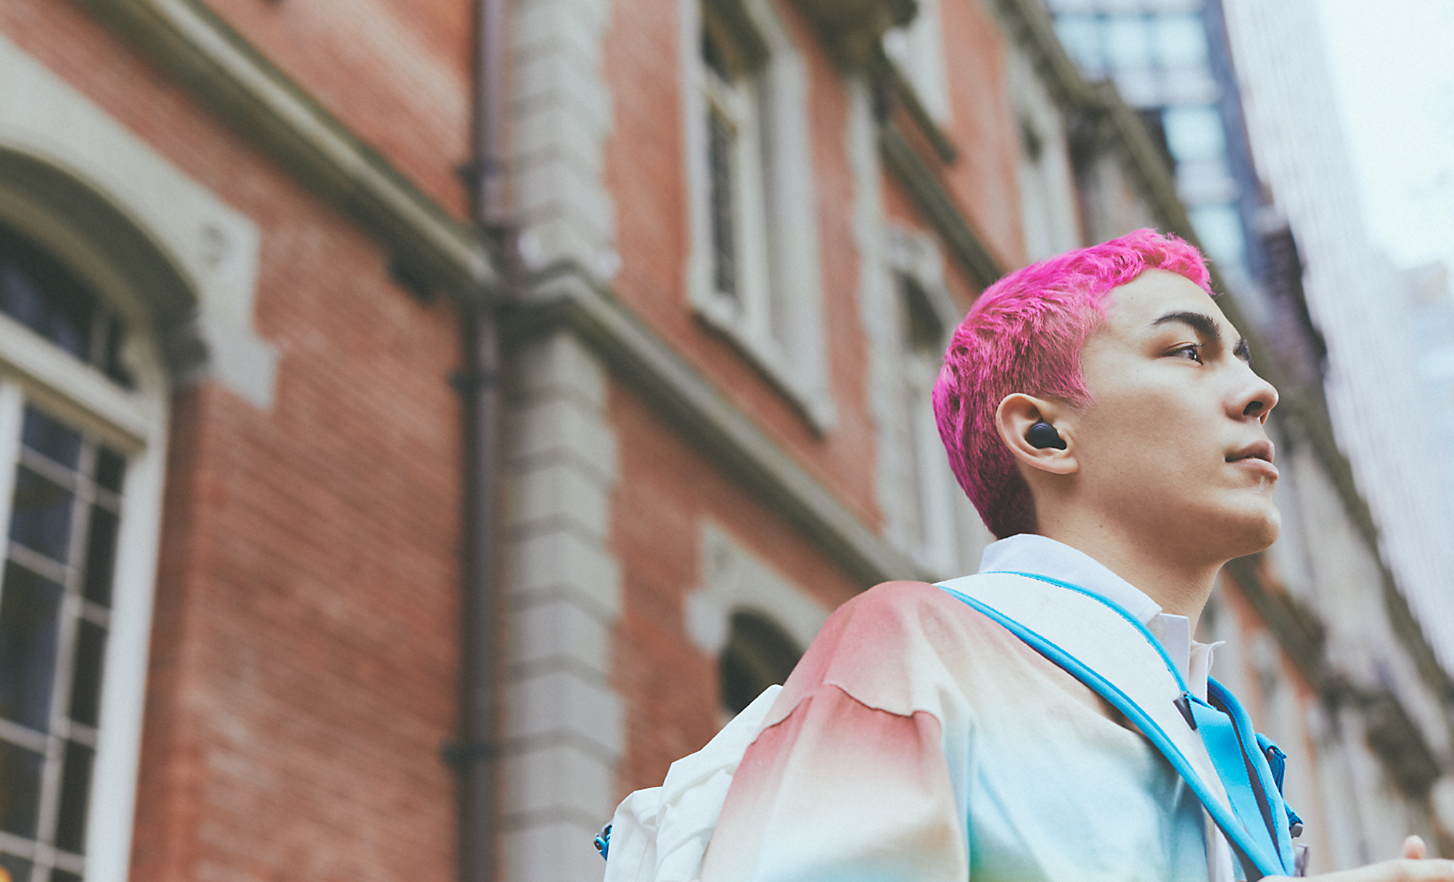 Image of a person with pink hair wearing black WF-C700N Wireless Noise Cancelling headphones in front of a brick building